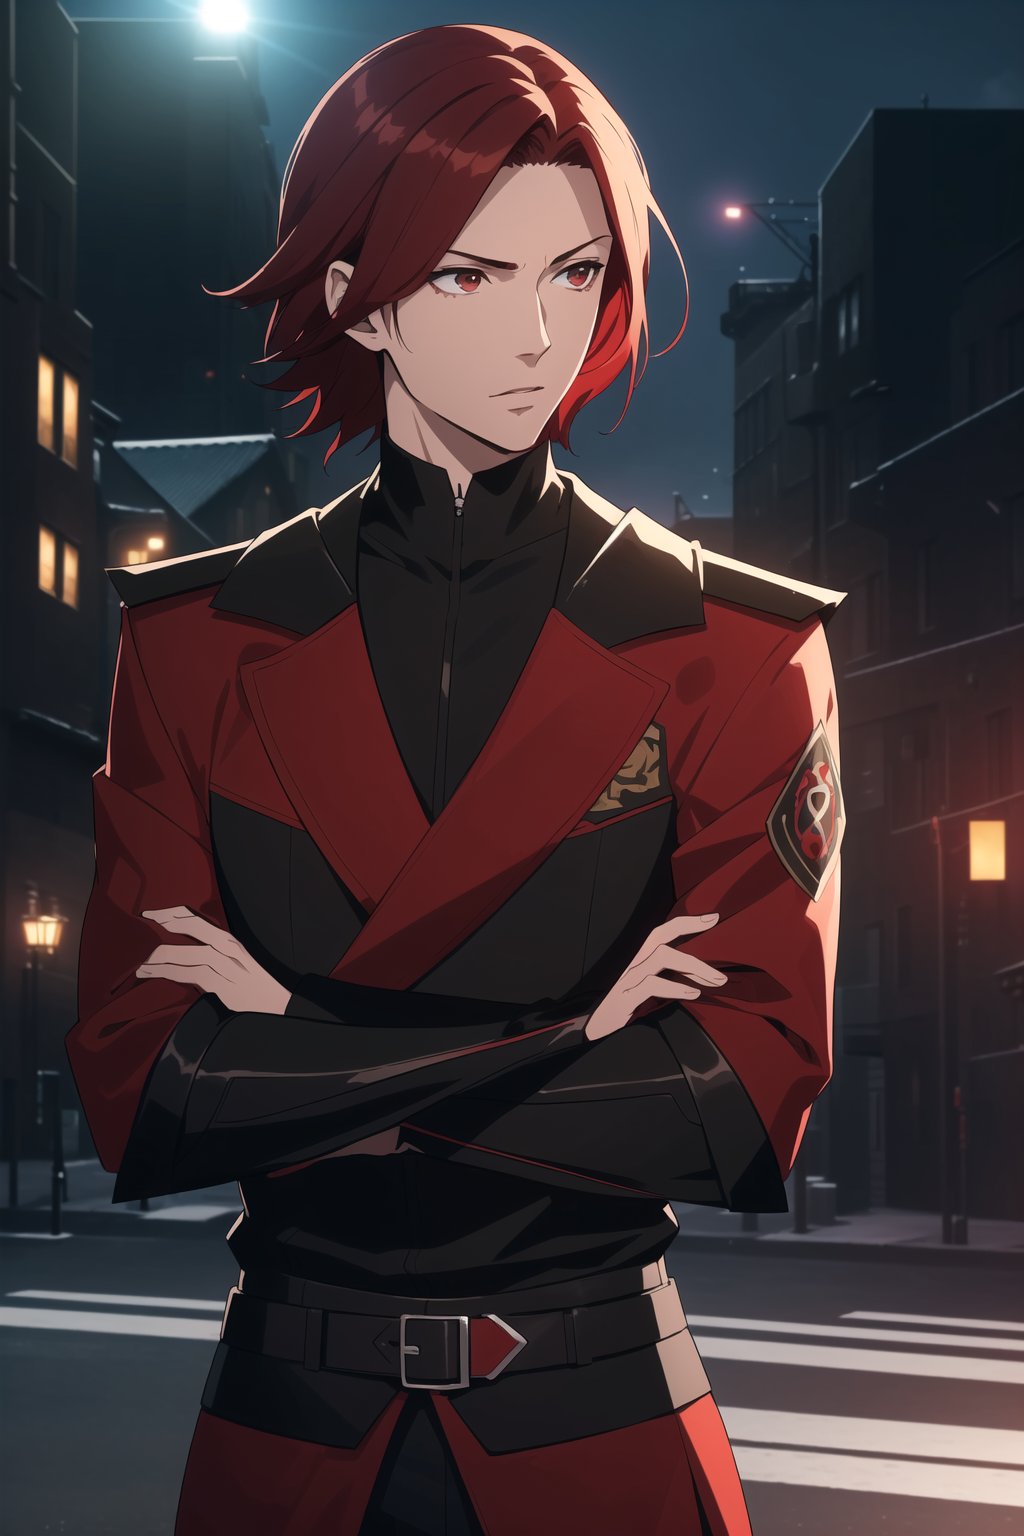 (Masterpiece, Best Quality), (A Skillful 25-Year-Old Japanese Male Secret Agent), (Wavy Short Crimson Hair:1.4), (Pale Skin), (Dark Brown Eyes), (Wearing Black and Red Sleek Tactical Outfit:1.4), (Modern City Road at Night:1.4), (Crossed Arms Pose:1.2), Centered, (Half Body Shot:1.4), (From Front Shot:1.4), Insane Details, Intricate Face Detail, Intricate Hand Details, Cinematic Shot and Lighting, Realistic and Vibrant Colors, Sharp Focus, Ultra Detailed, Realistic Images, Depth of Field, Incredibly Realistic Environment and Scene, Master Composition and Cinematography, castlevania style,castlevania style